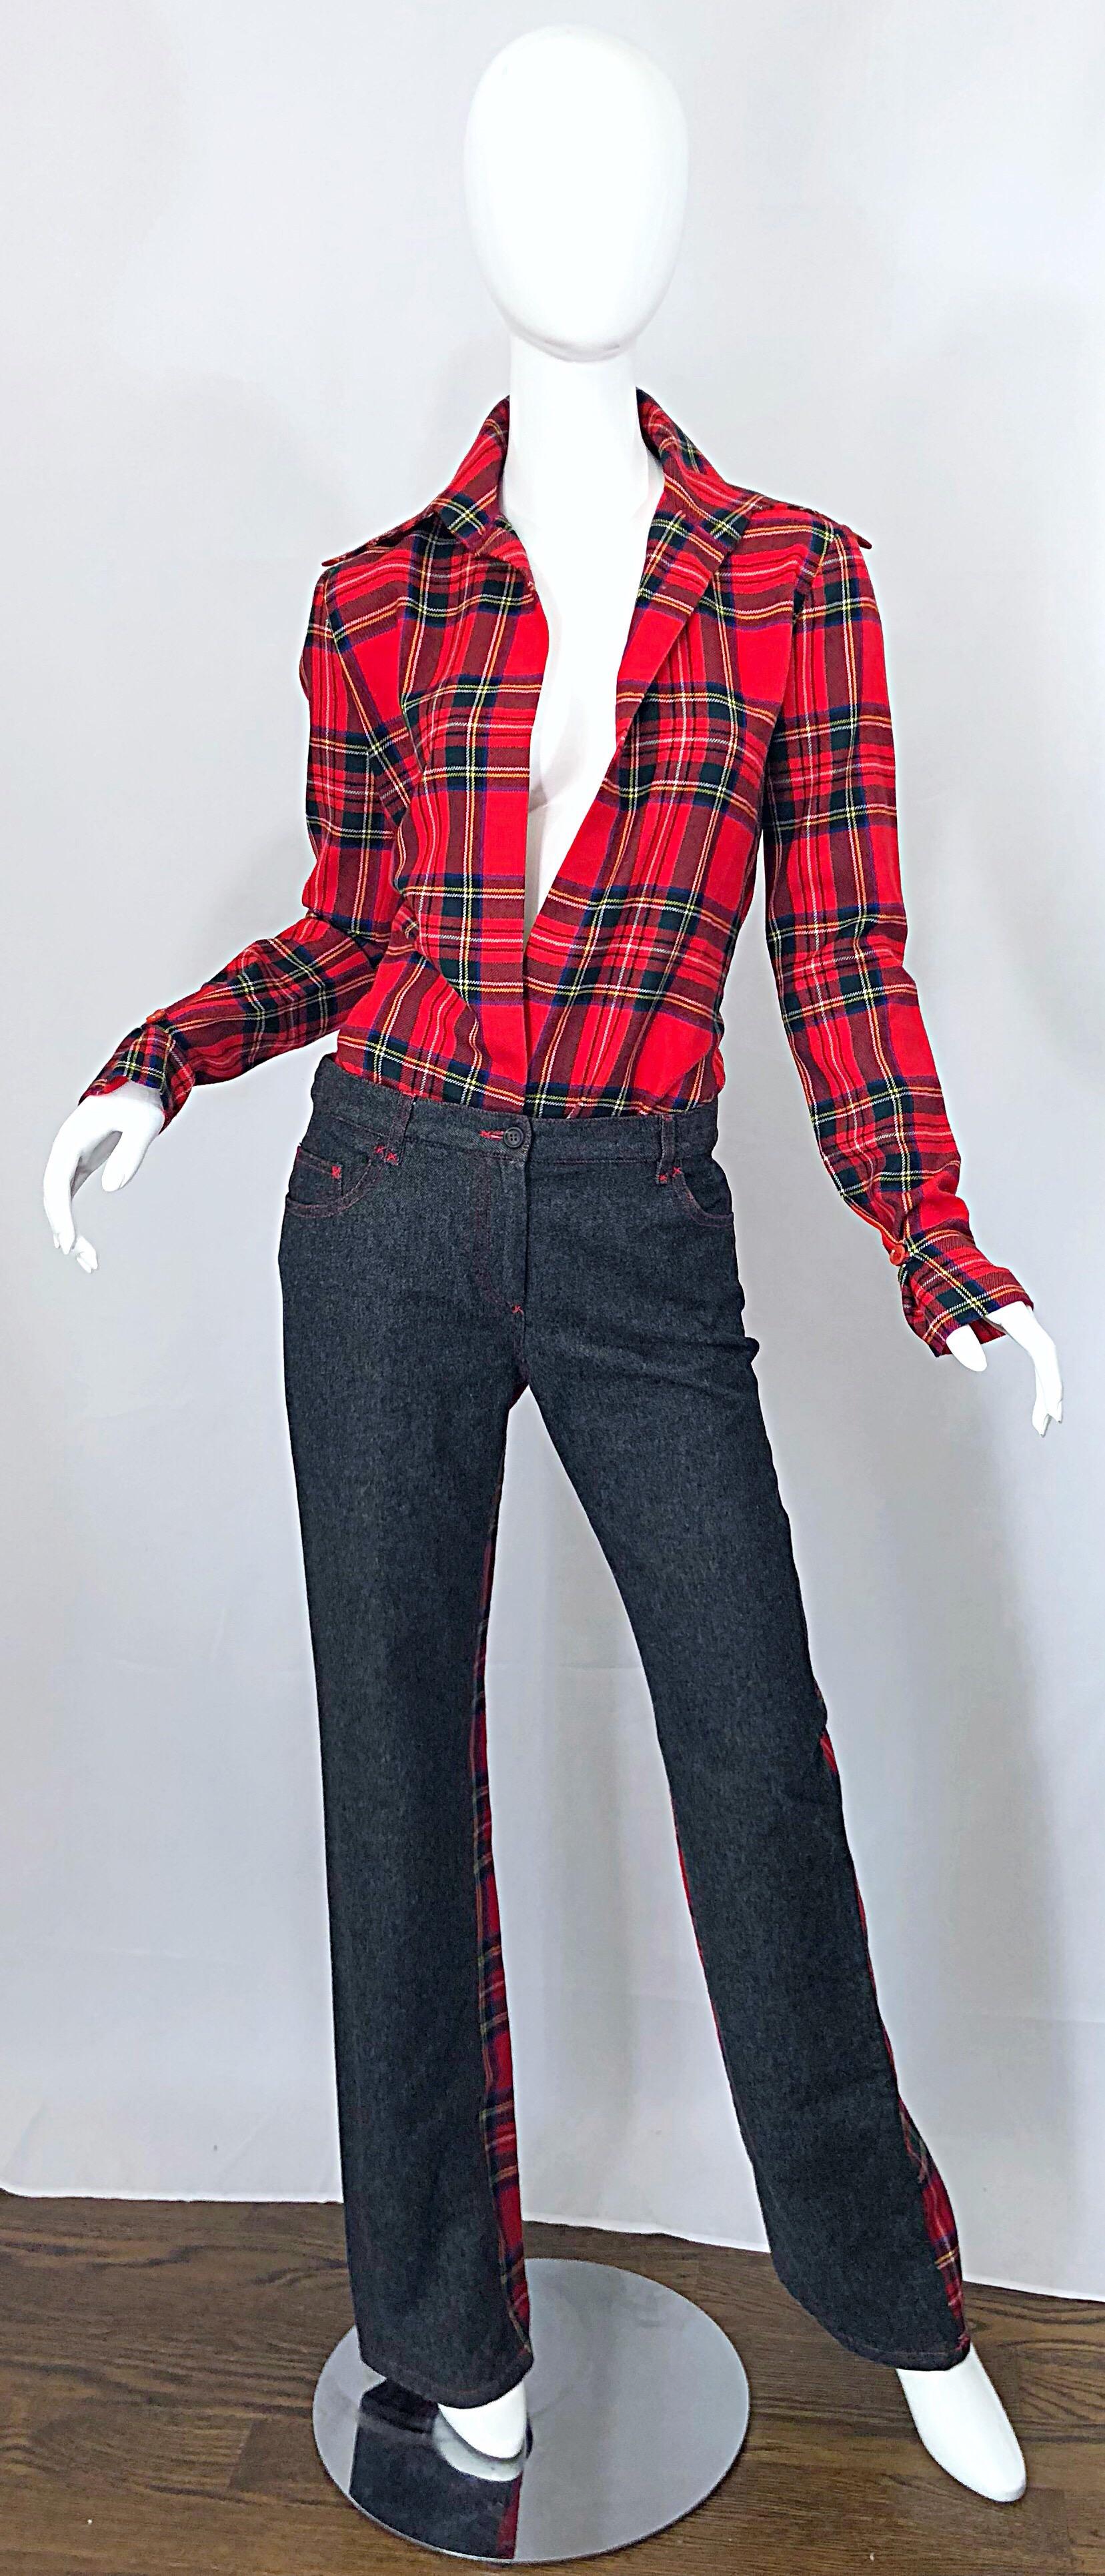 Rare nad sexy vintage late 90s DOLCE & GABBANA red tartan virgin wool plunging top with matching denim and red tartan plaid flared boot cut jeans! Top features a plunging neckline with an exaggerated collar and tapered sleeve cuffs. Low rise